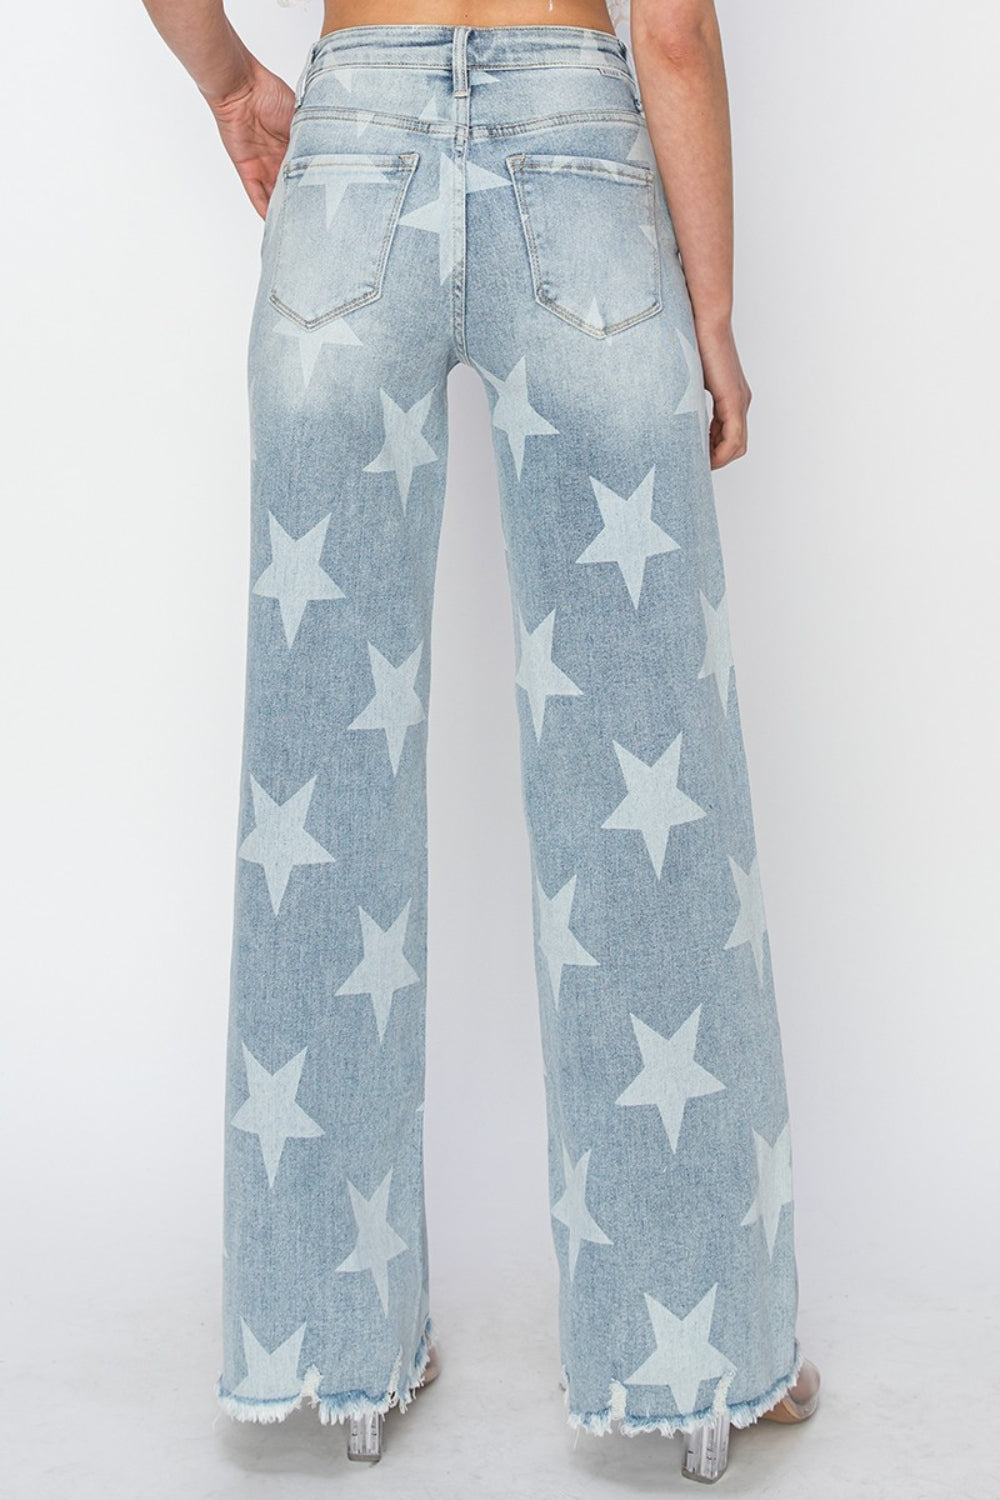 The Raw Hem Star Wide Leg Jeans are a fashionable and eye-catching choice for those looking to make a statement with their outfit. The raw hem detail gives these jeans a casual and edgy vibe, while the star embellishments add a touch of whimsical charm. The wide leg silhouette offers a comfortable and flattering fit, making them a versatile piece that can be dressed up or down. 0-3X